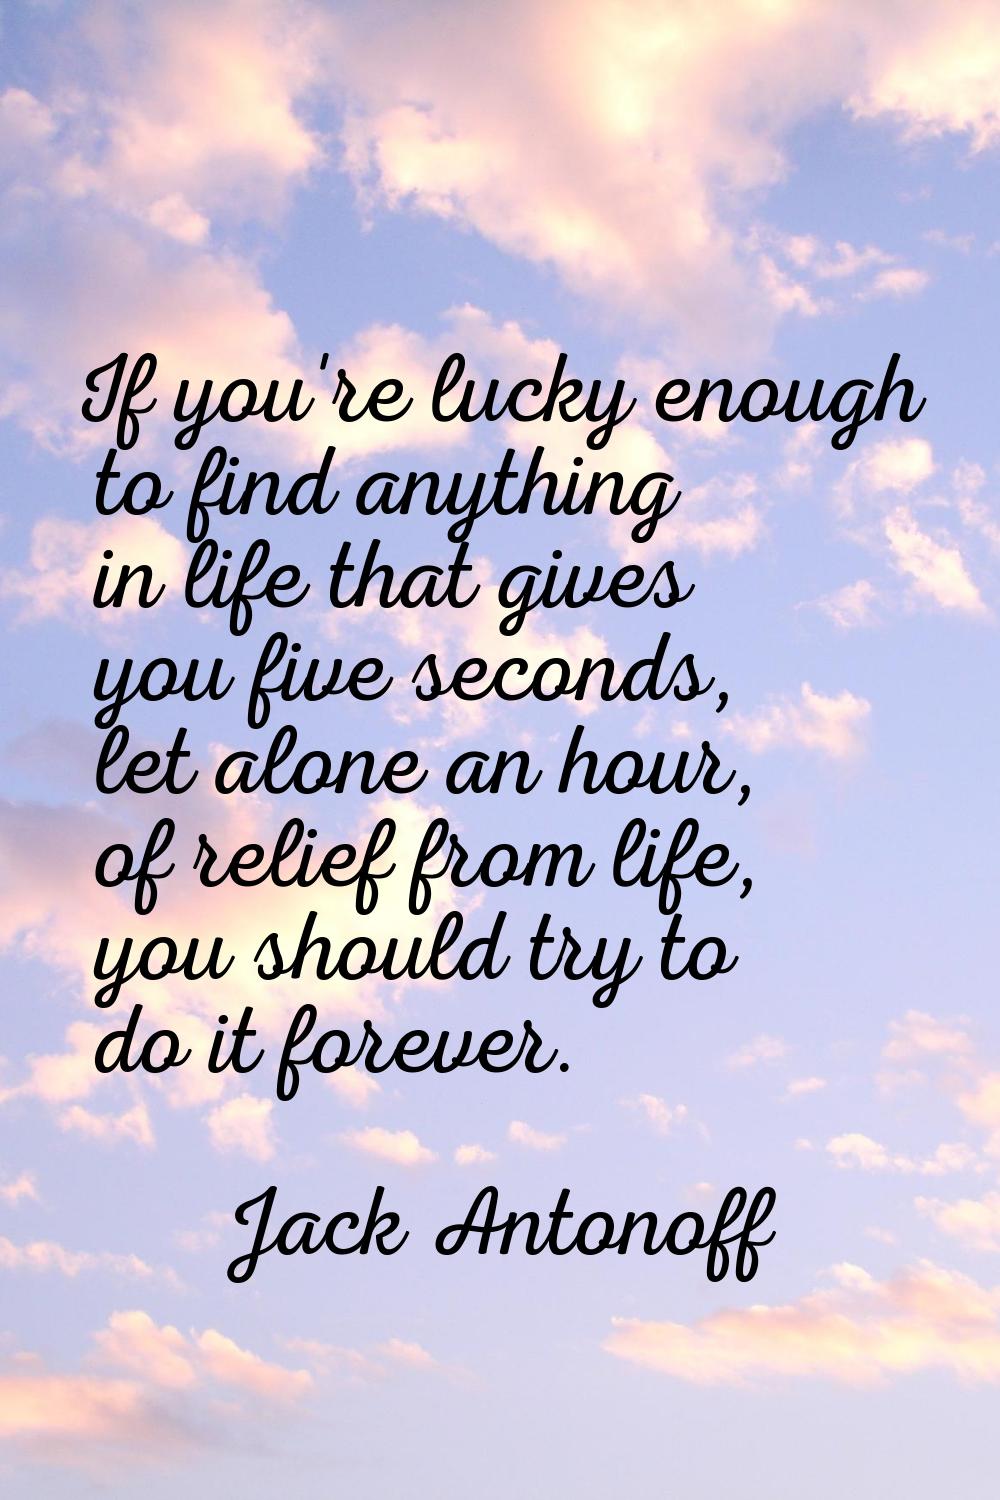 If you're lucky enough to find anything in life that gives you five seconds, let alone an hour, of 